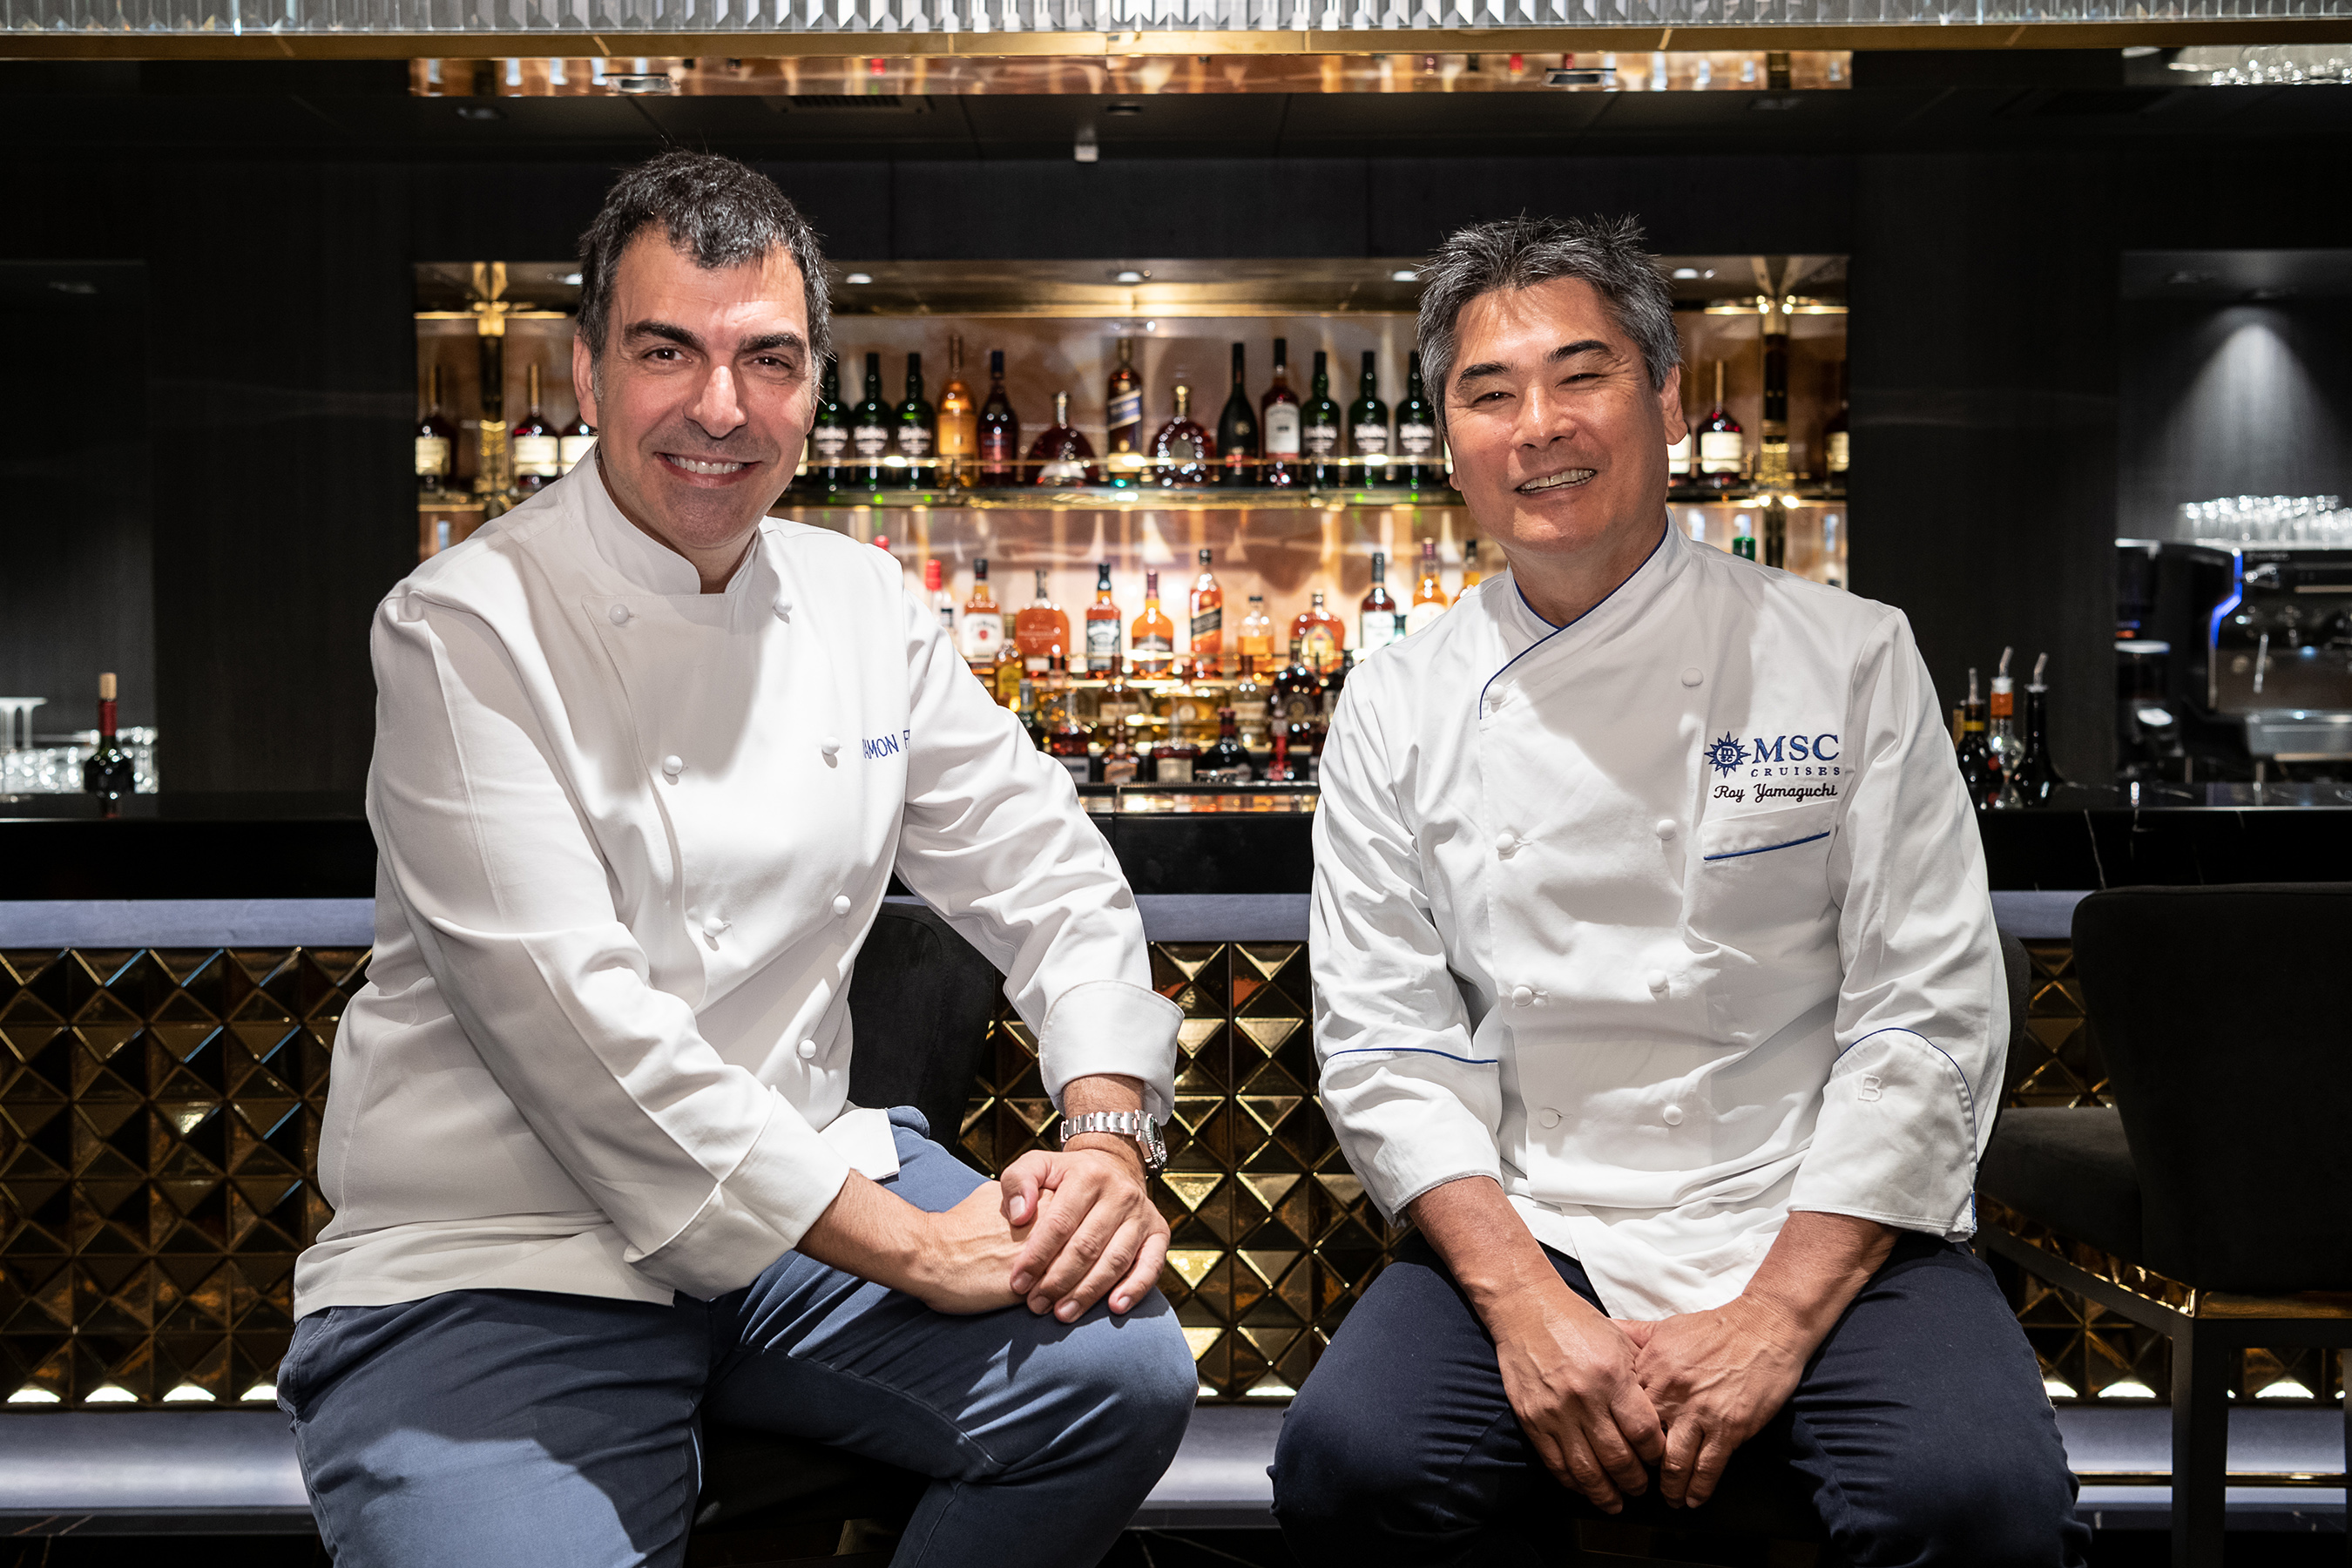 Celebrity Chefs Ramon Freixa and Roy Yamaguchi extend partnership with MSC Cruises for specialty restaurants aboard MSC Seaview.